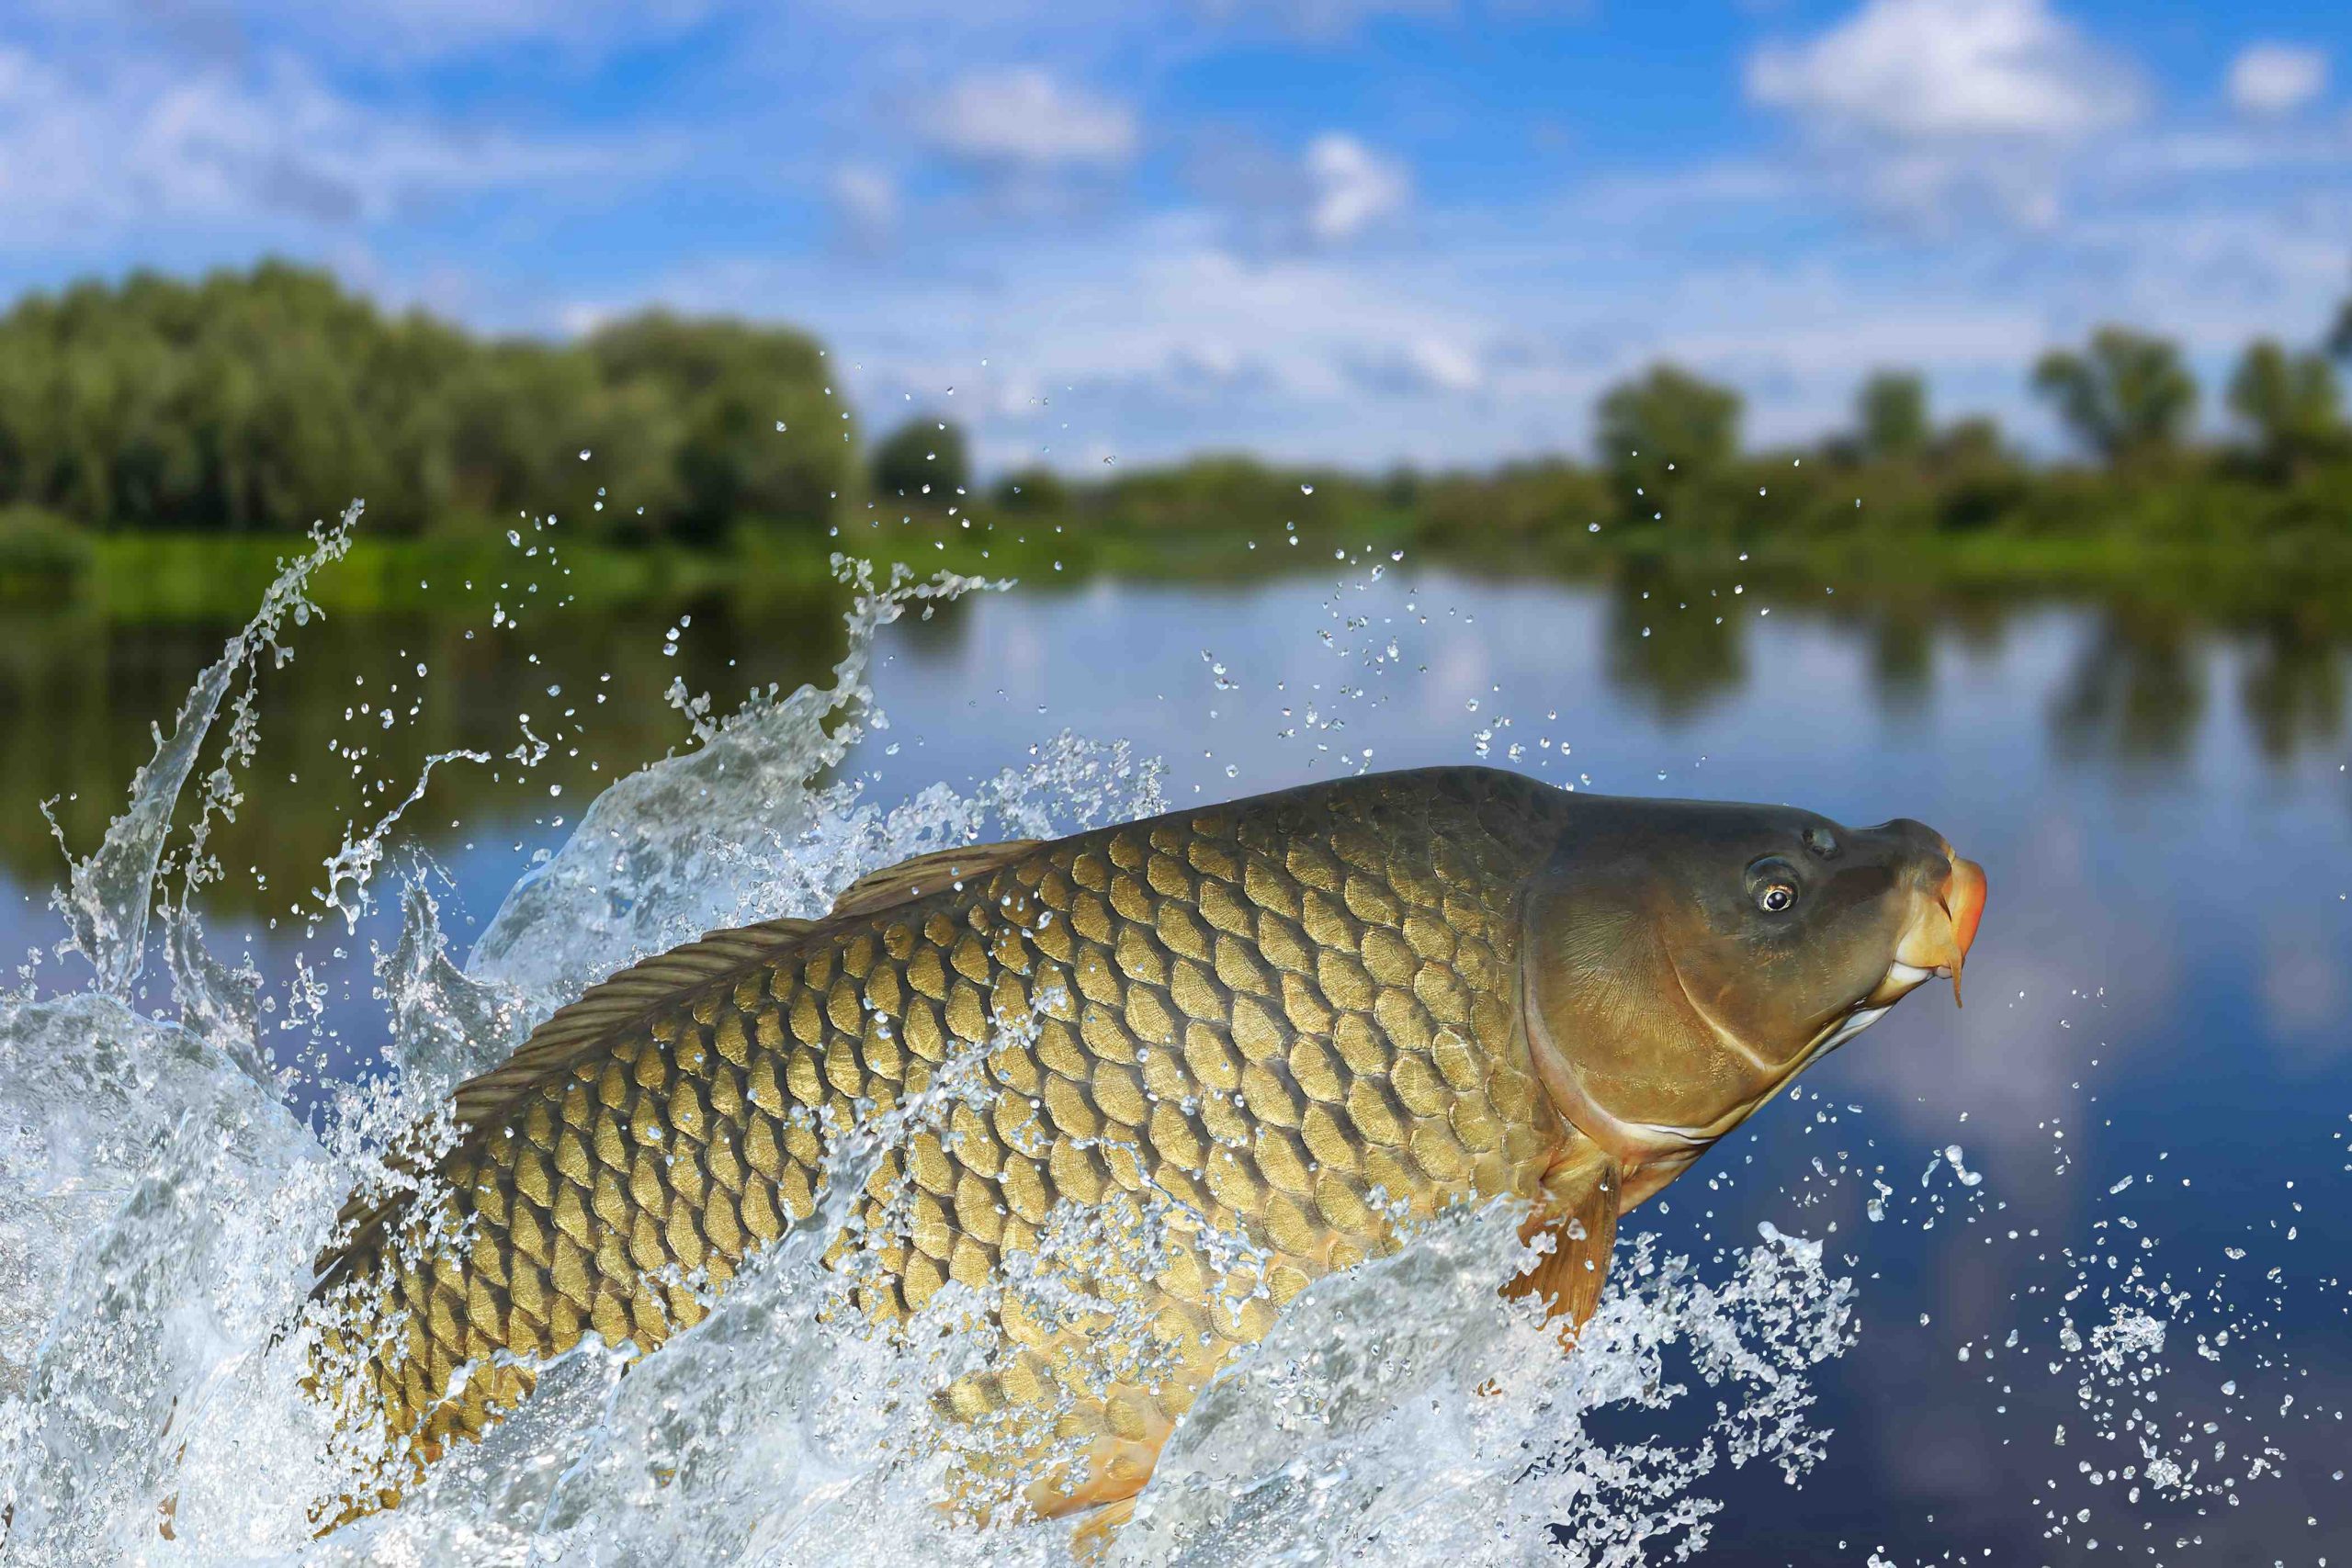 Is carp safe to eat raw?